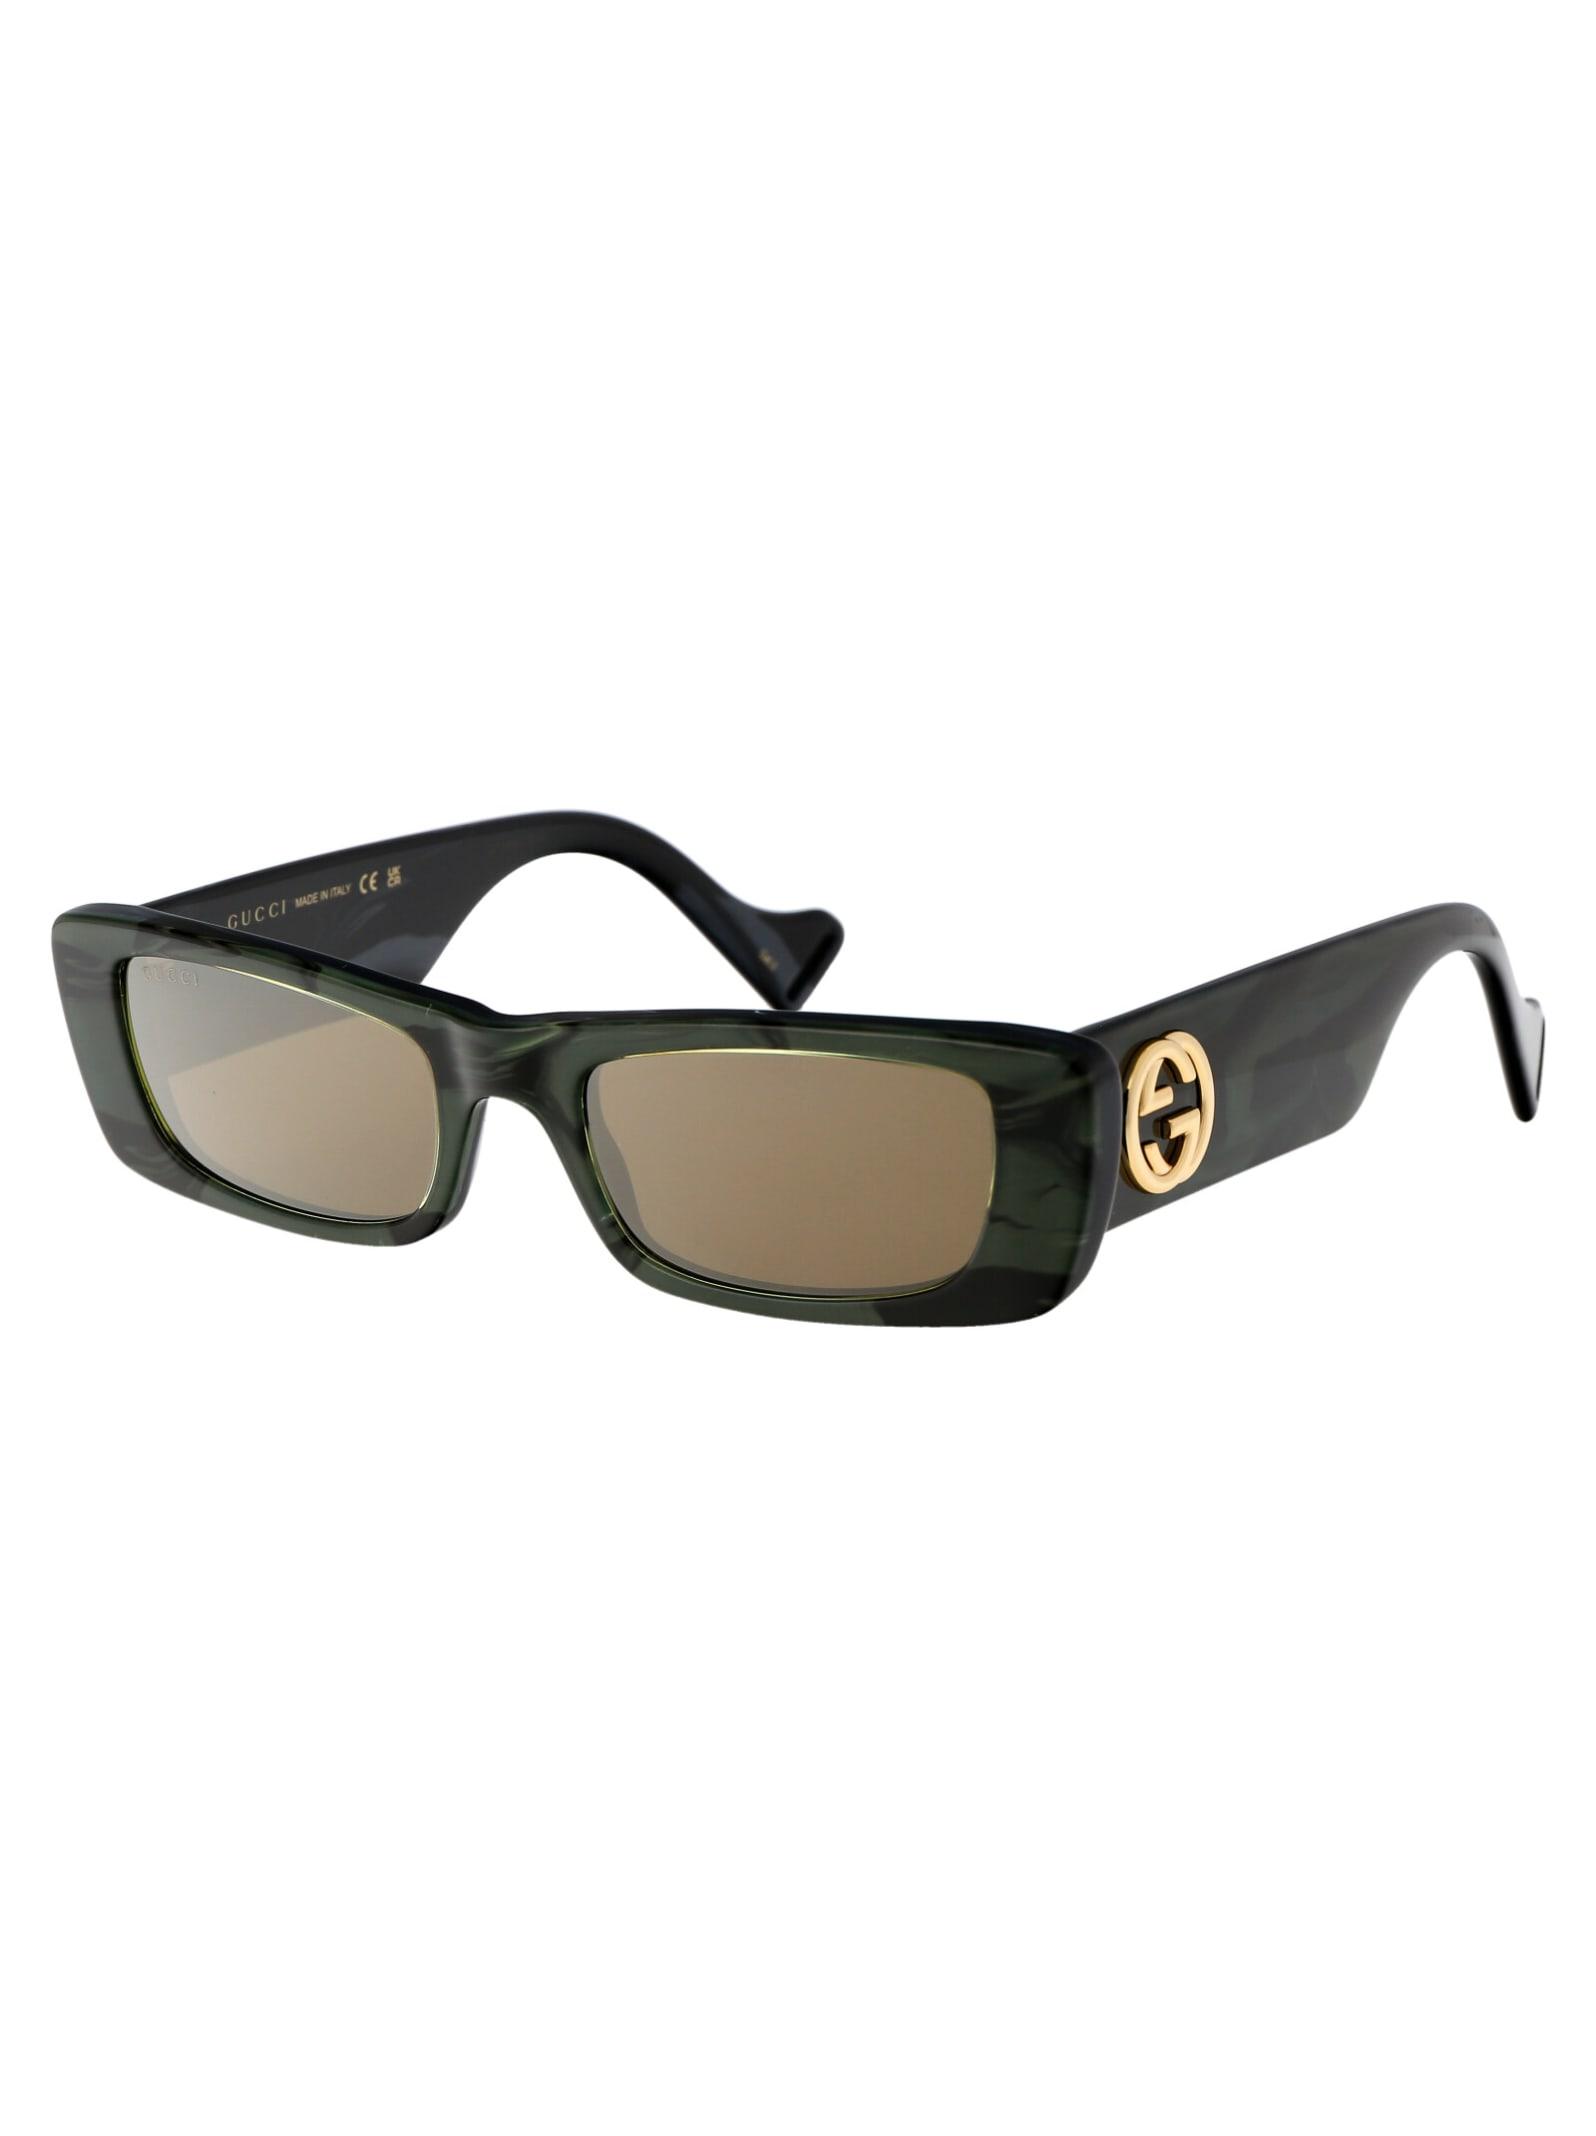 Gucci 60MM Square Sunglasses With Detachable Charm on SALE